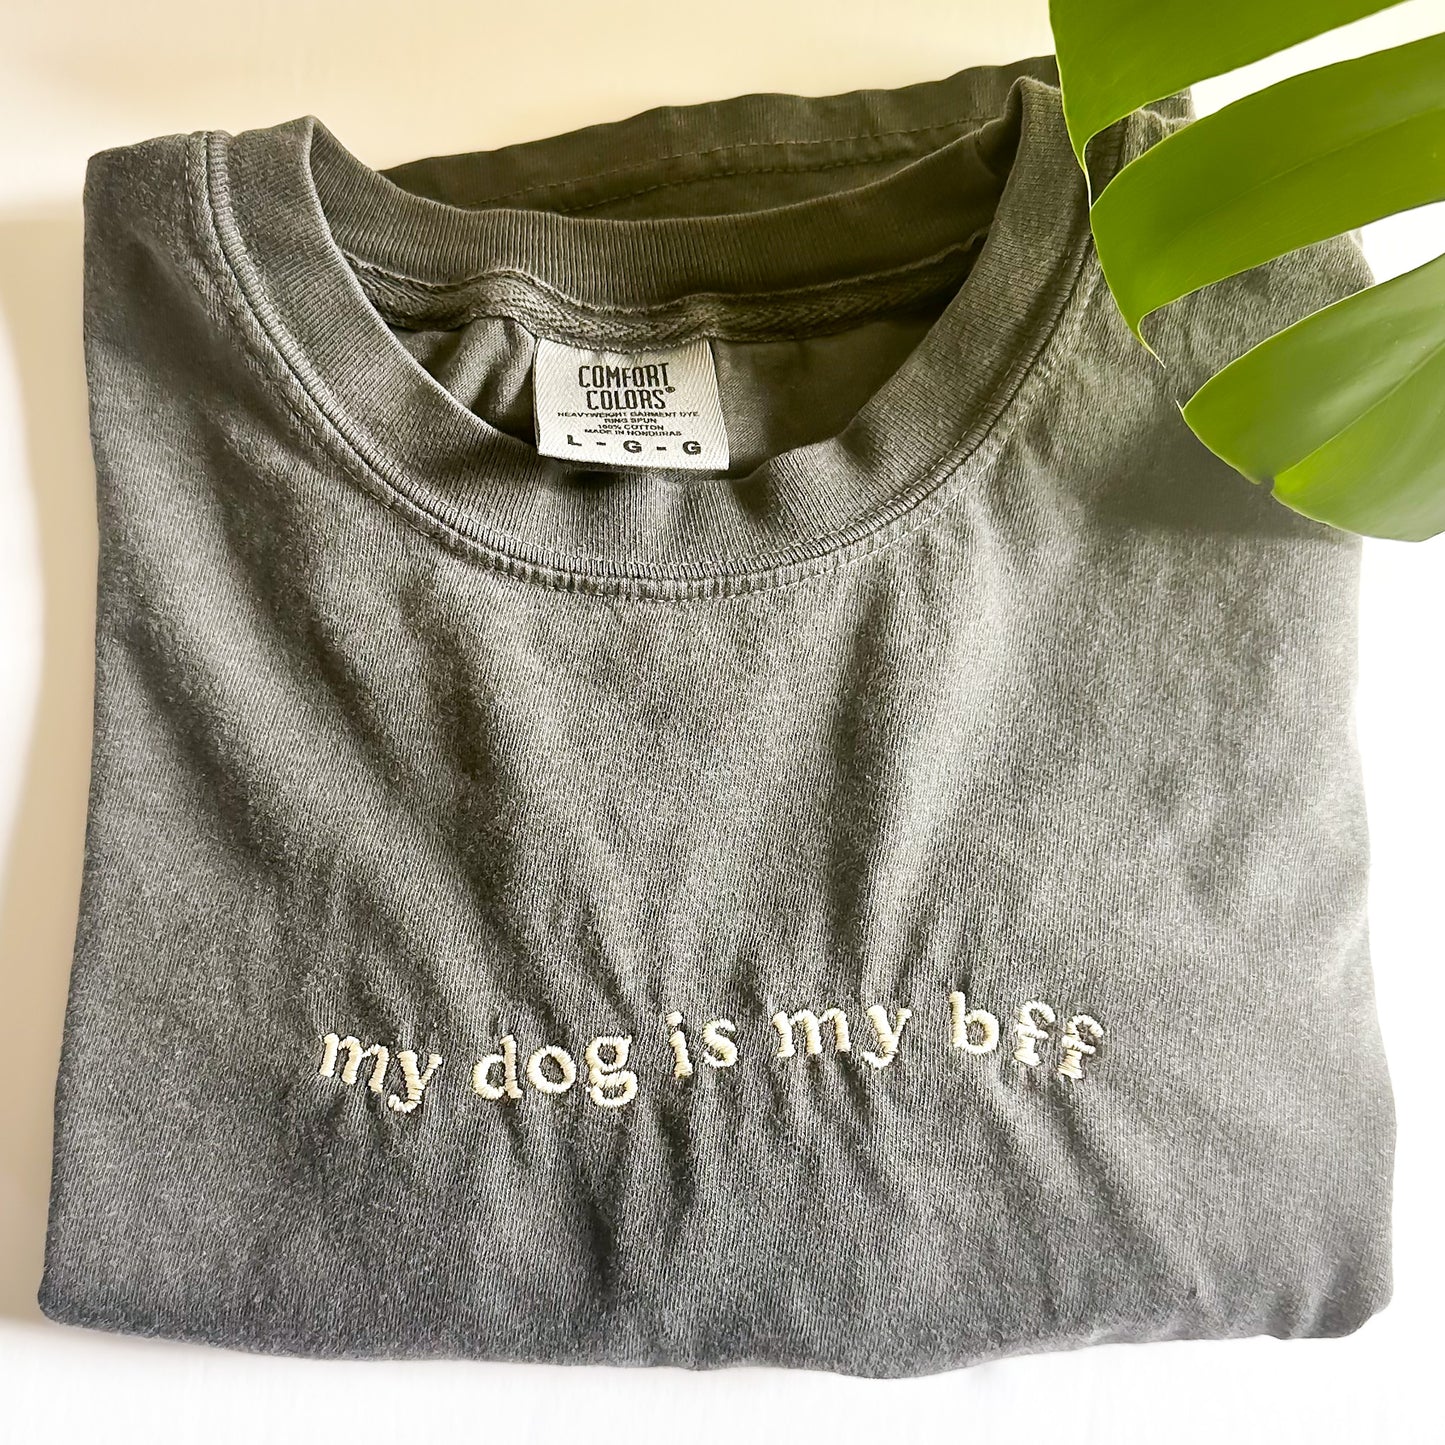 My Dog is my BFF Embroidered Tee Shirt